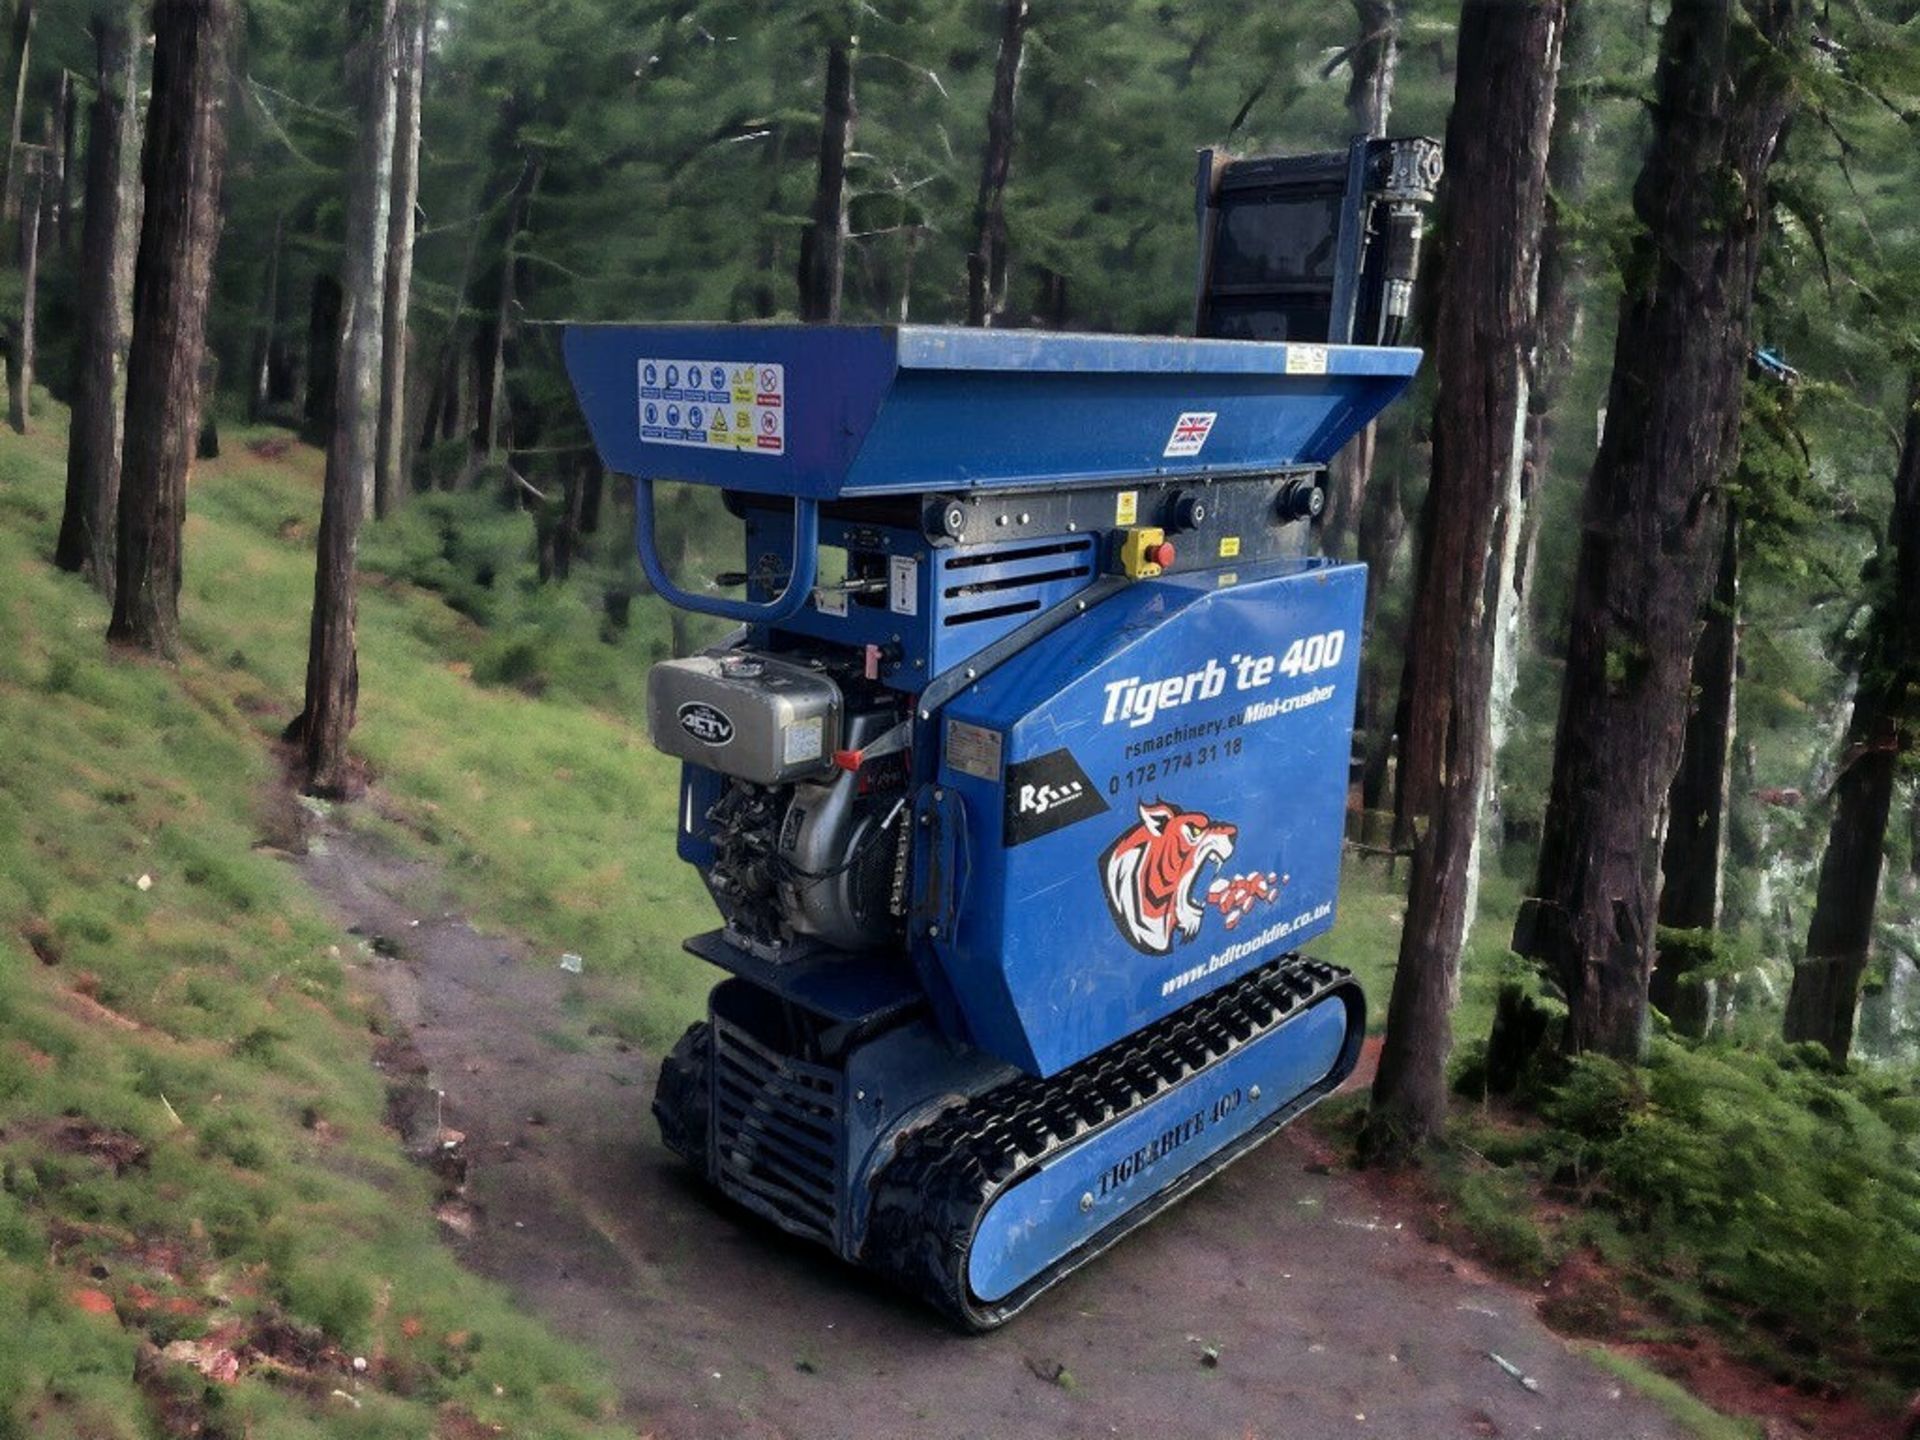 2020 TIGERBITE 400 TRACKED MINI CRUSHER - EFFICIENT, COMPACT, AND READY TO WORK - Image 4 of 7